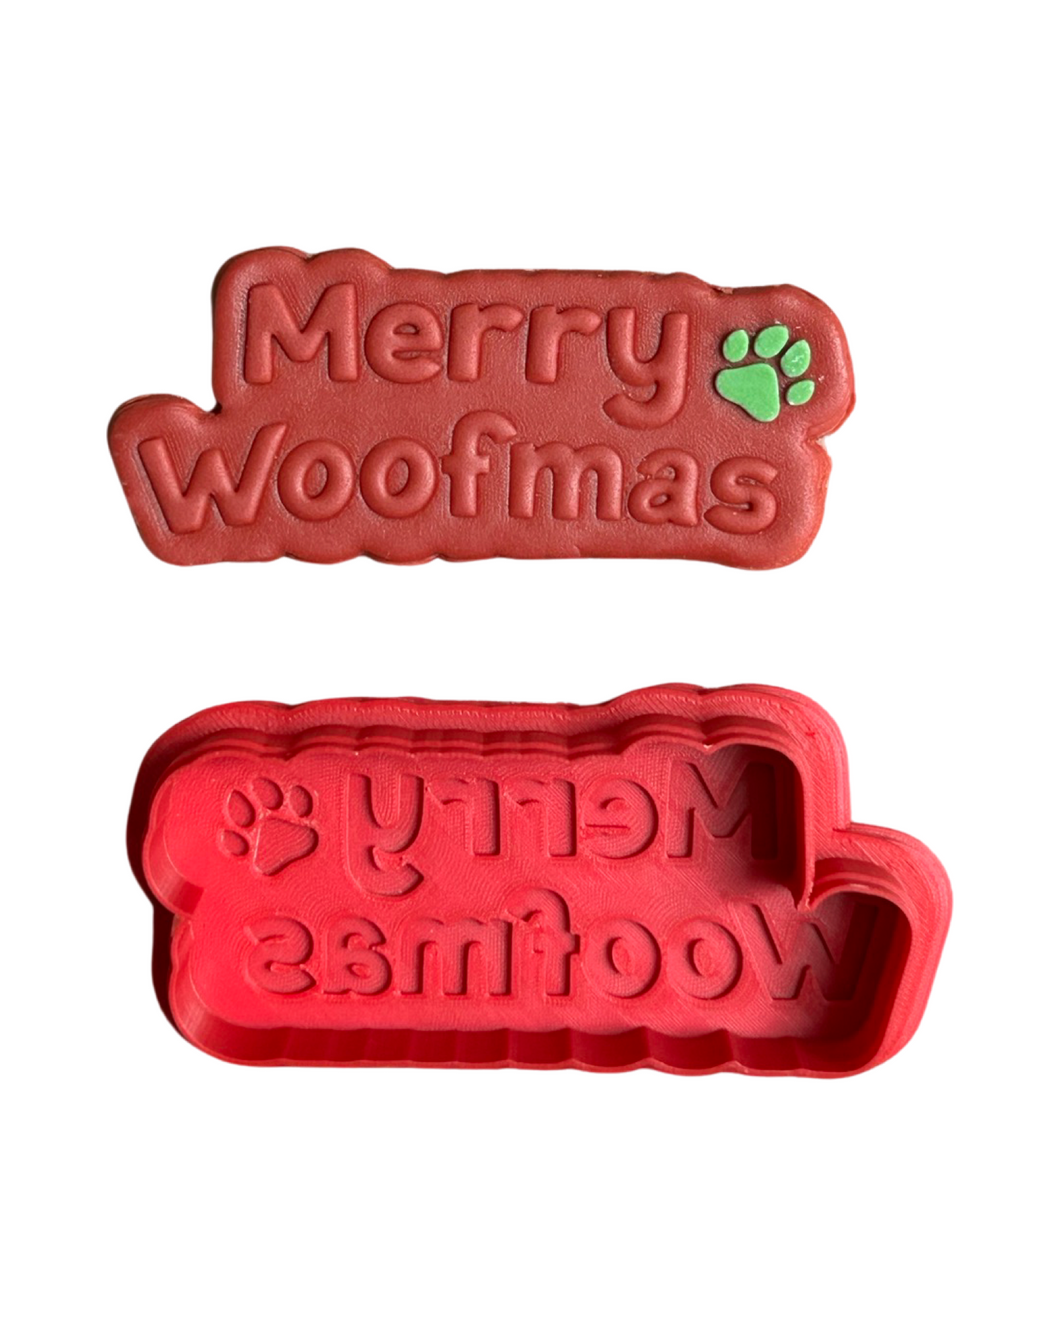 Merry Woofmas Cookie Cutter Stamp Dog Christmas wreath puppy present